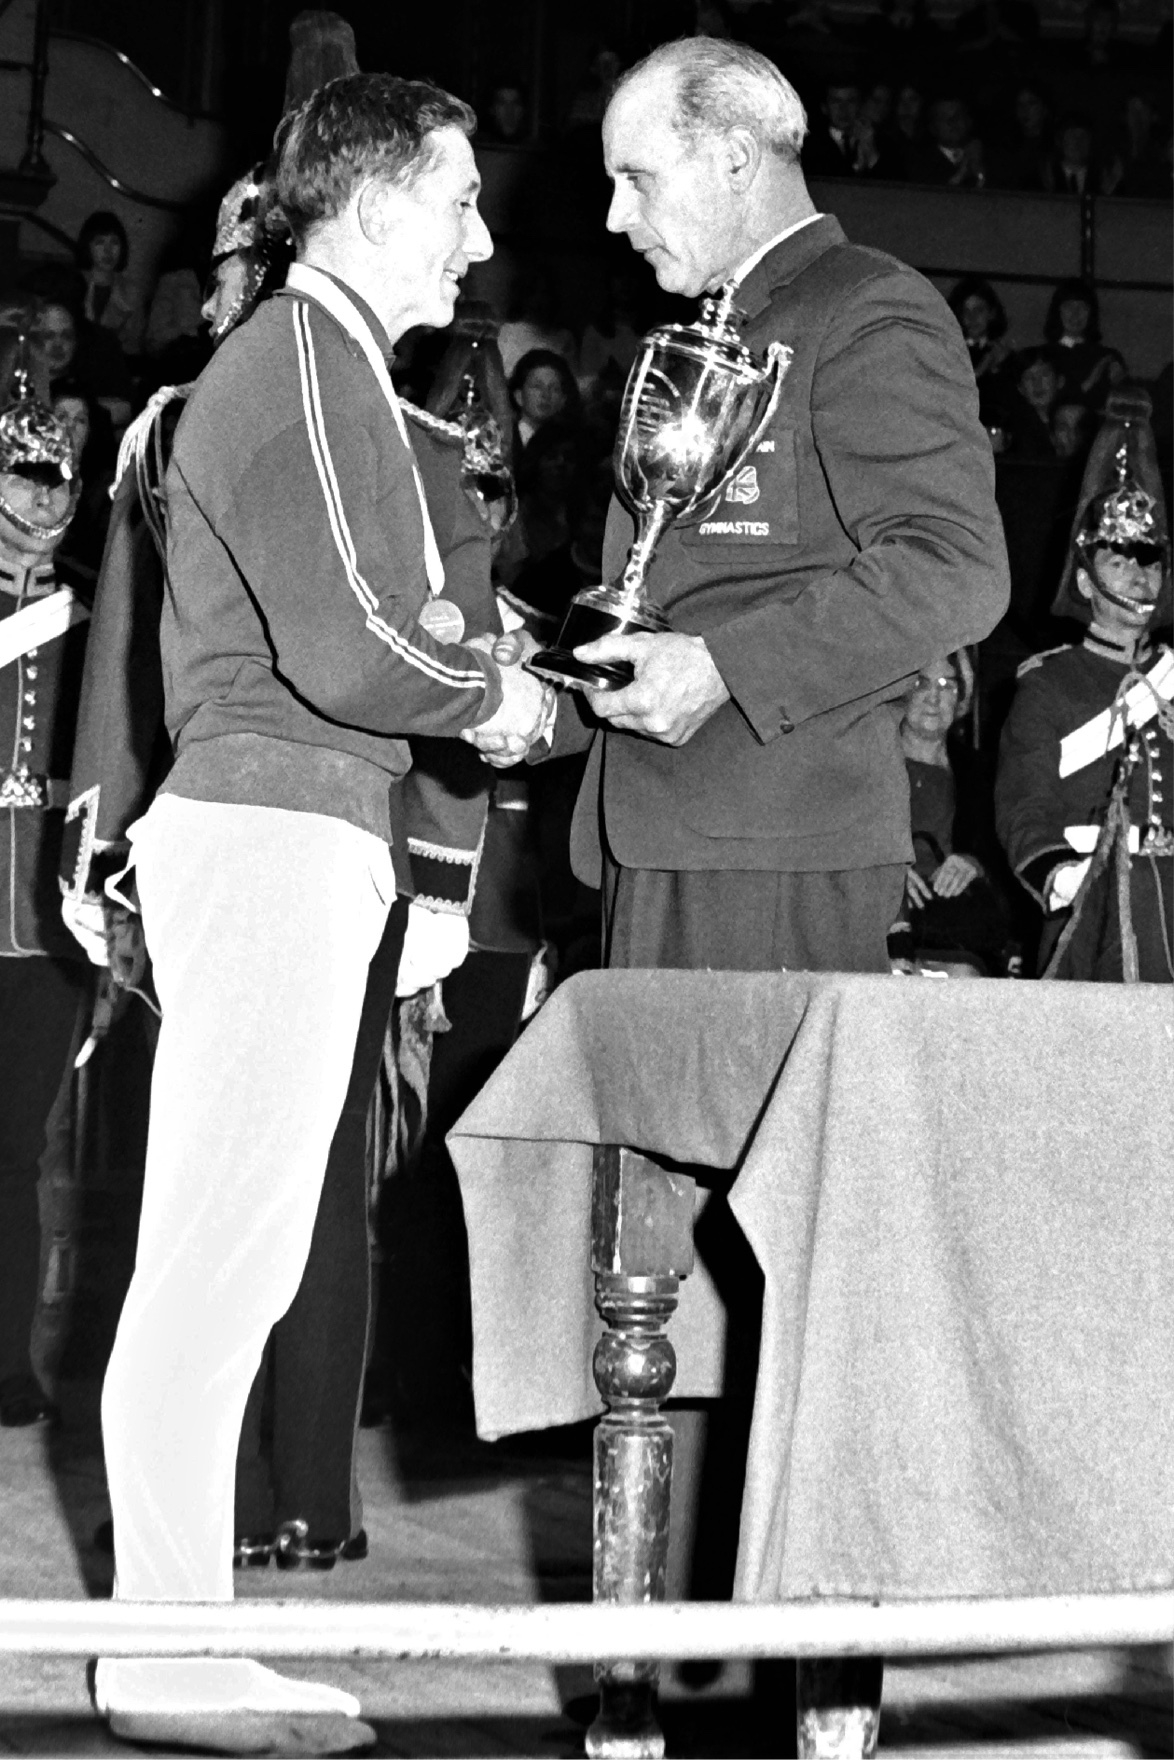 Jimmy received the Bobby Williams trophy for the highest individual score at the 1968 British Championships